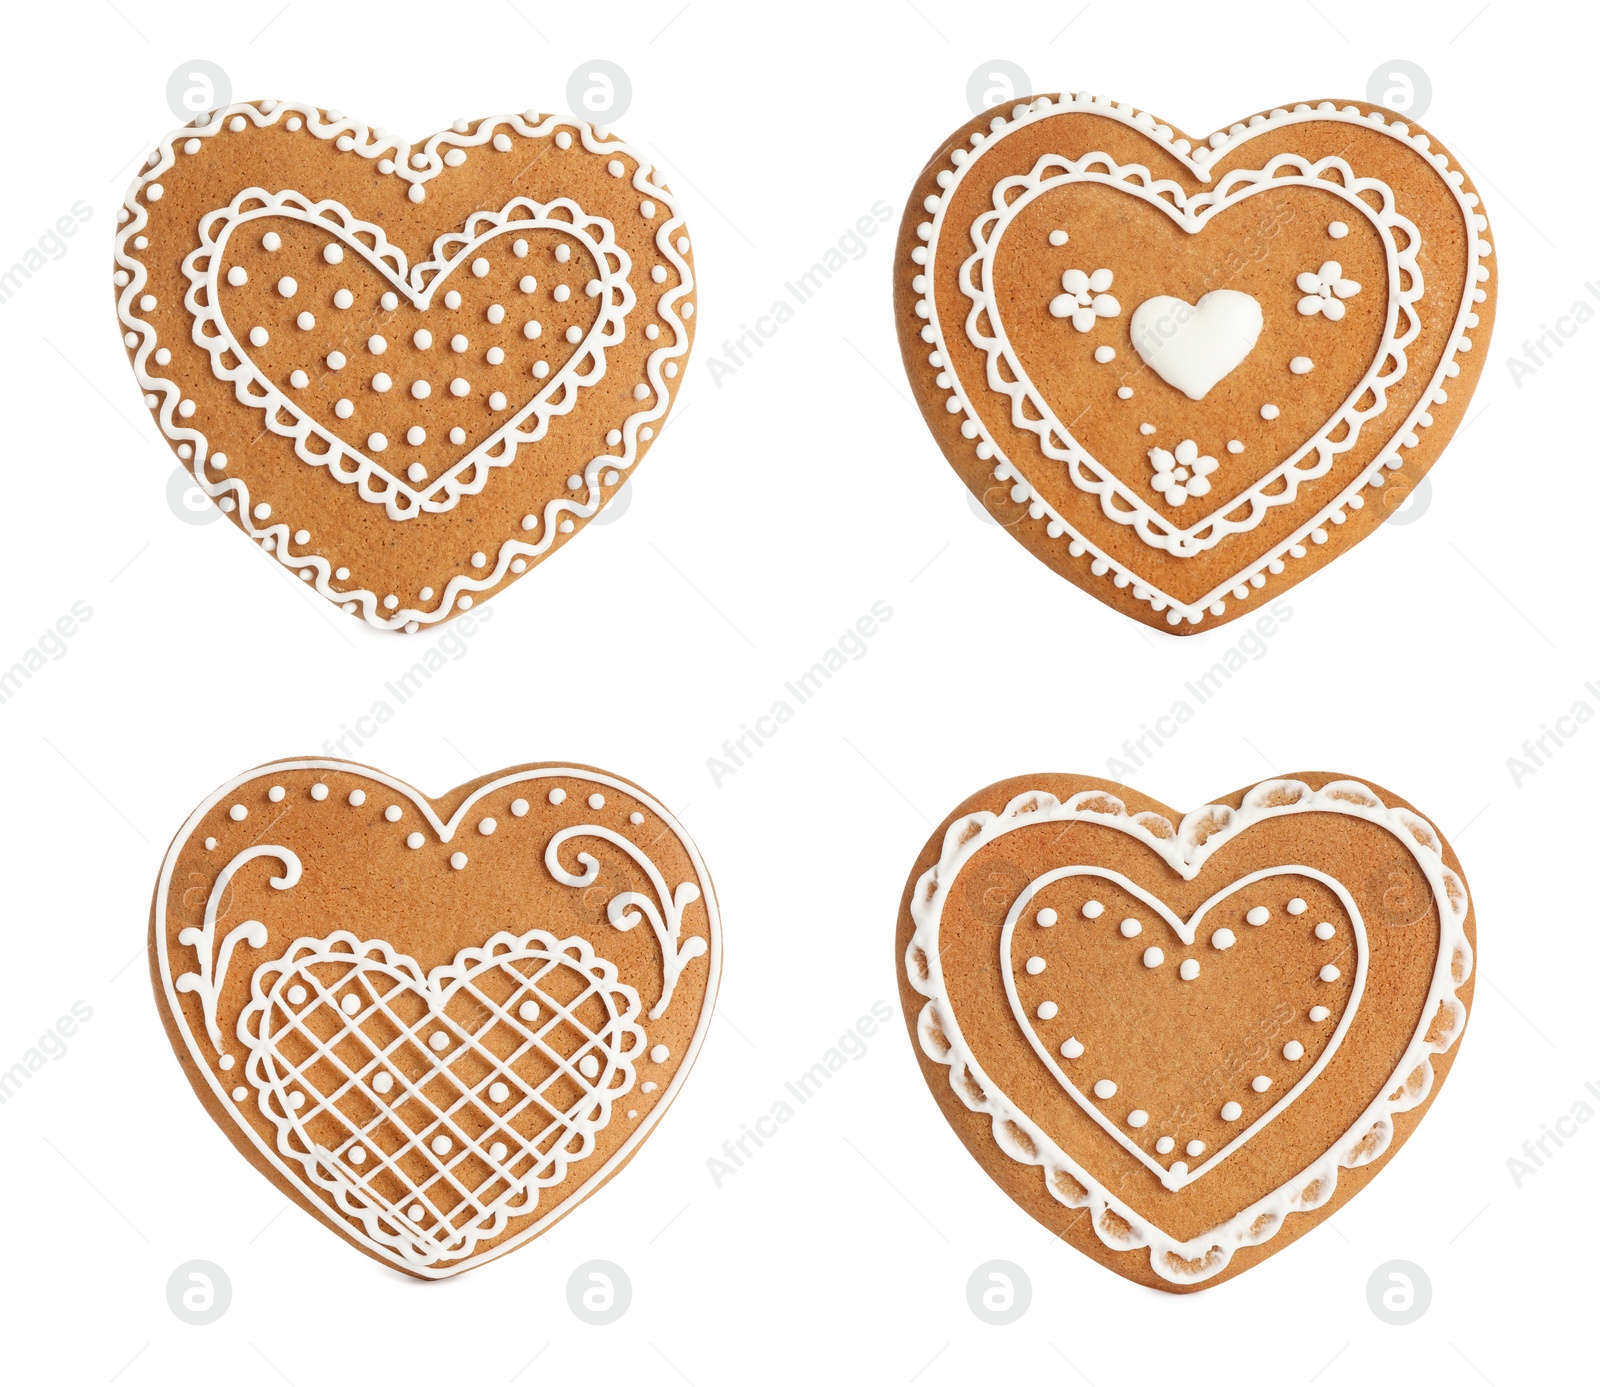 Image of Set of Christmas gingerbread heart shaped cookies on white background